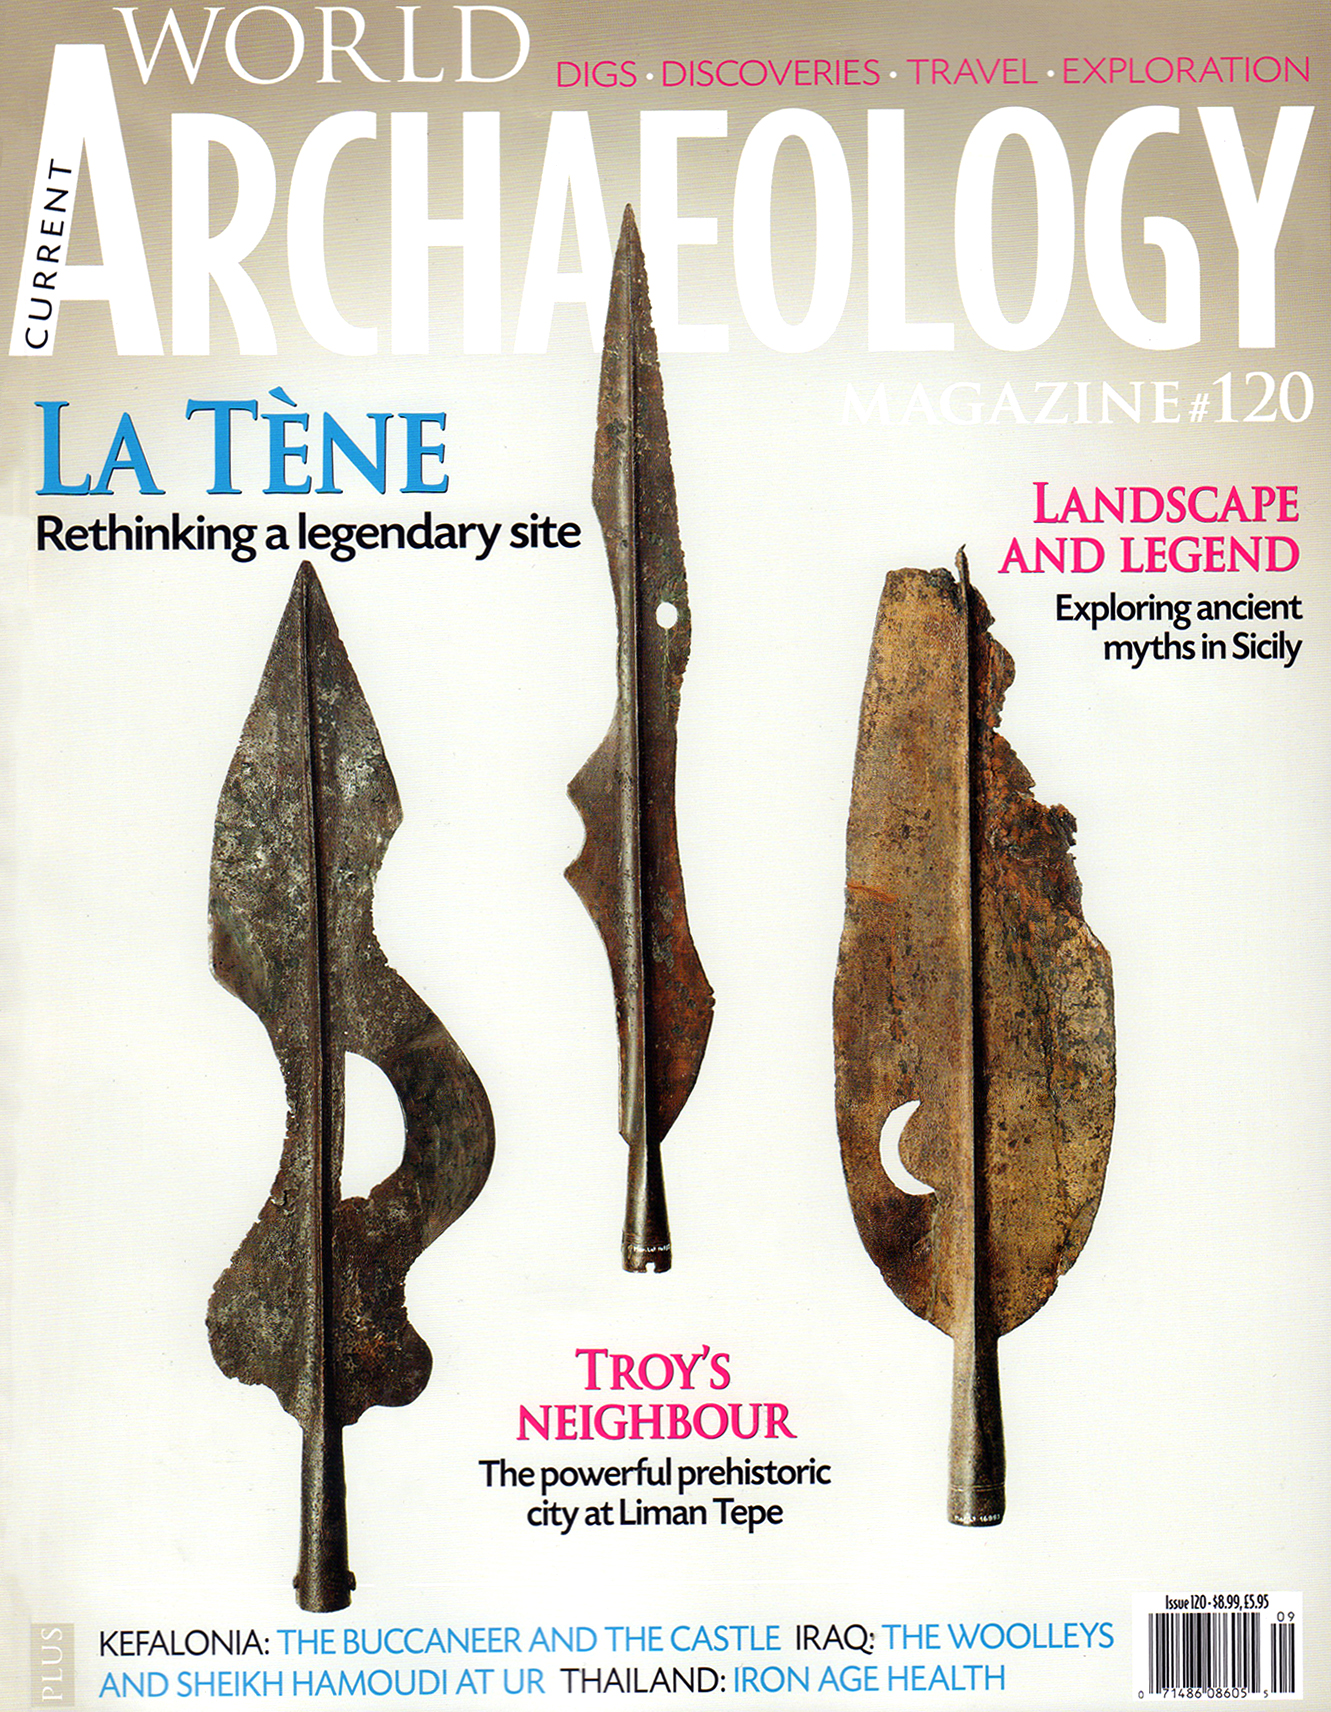 Subscribe to Current World Archaeology Magazine